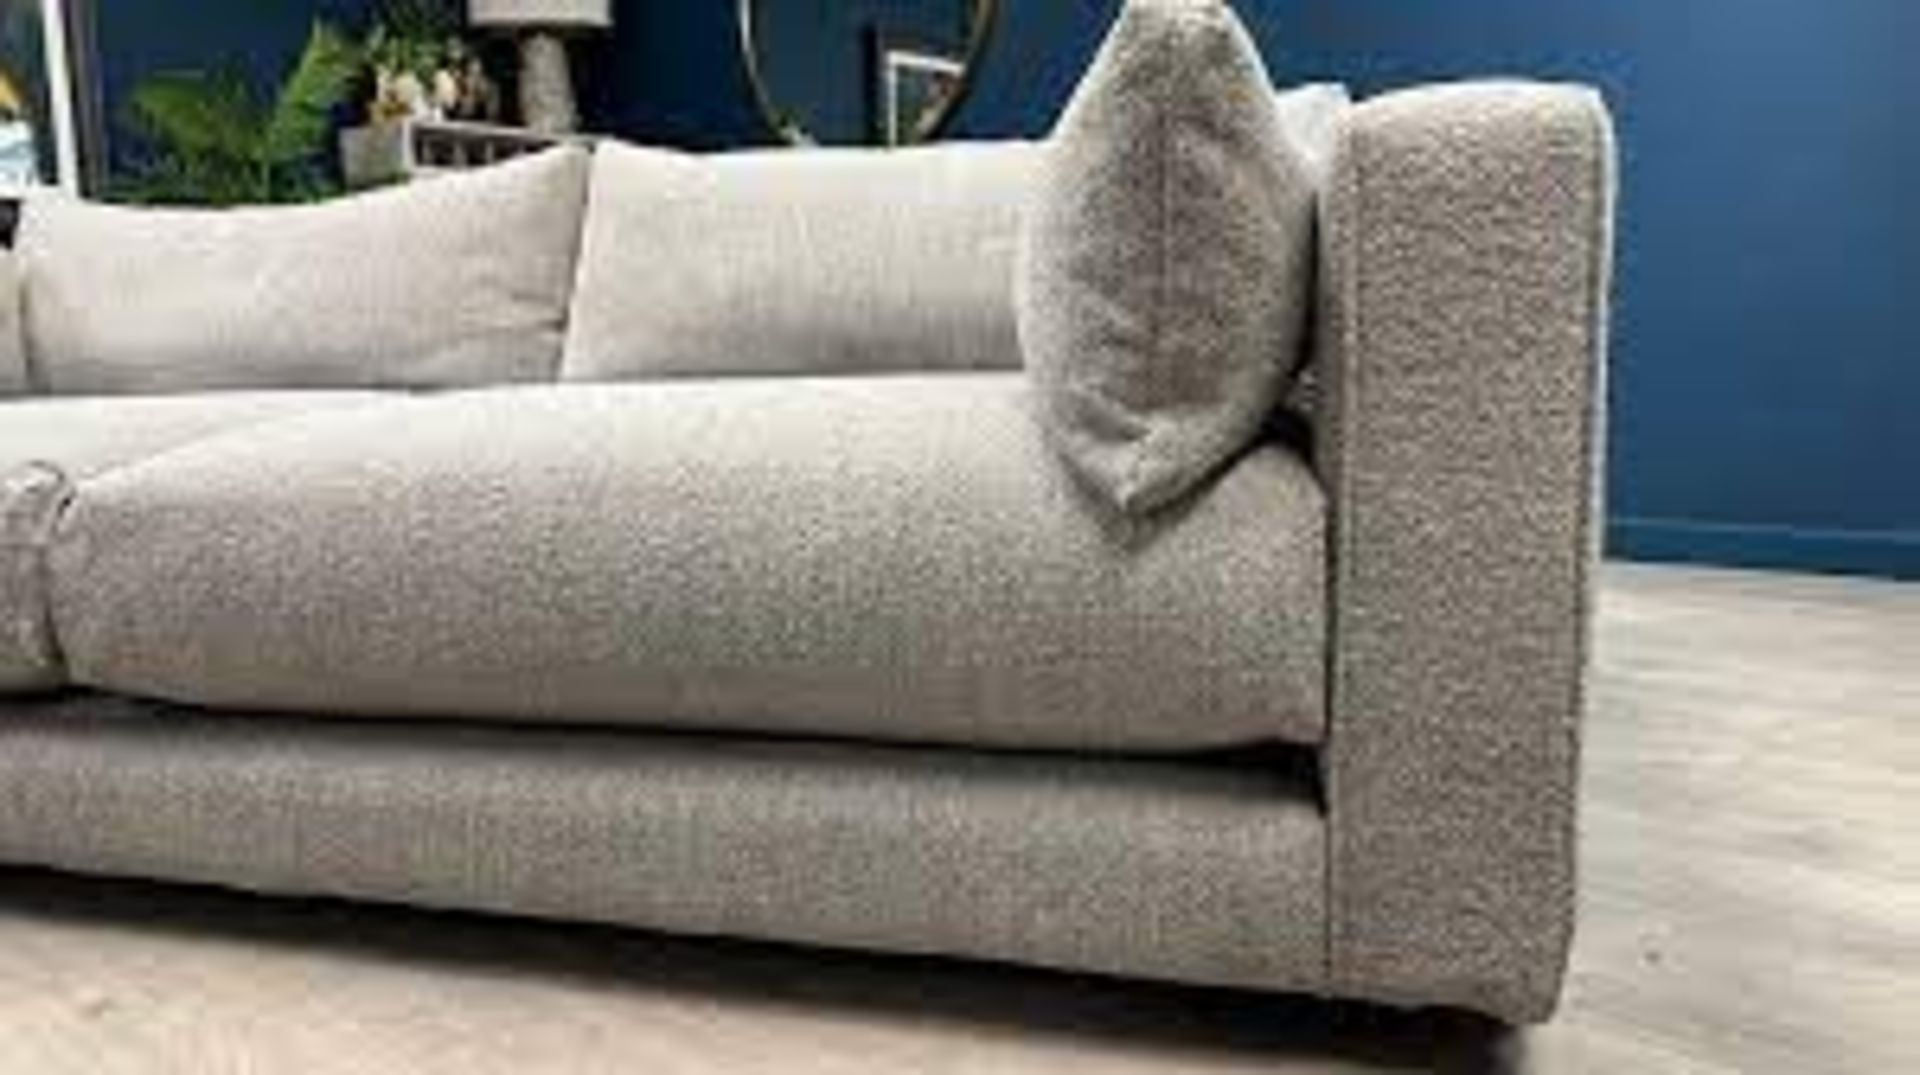 Cox & Cox Teddy Sofa in Soft Grey. RRP £2,795.00. - SR5. offers cosy, contemporary style...the - Image 2 of 2